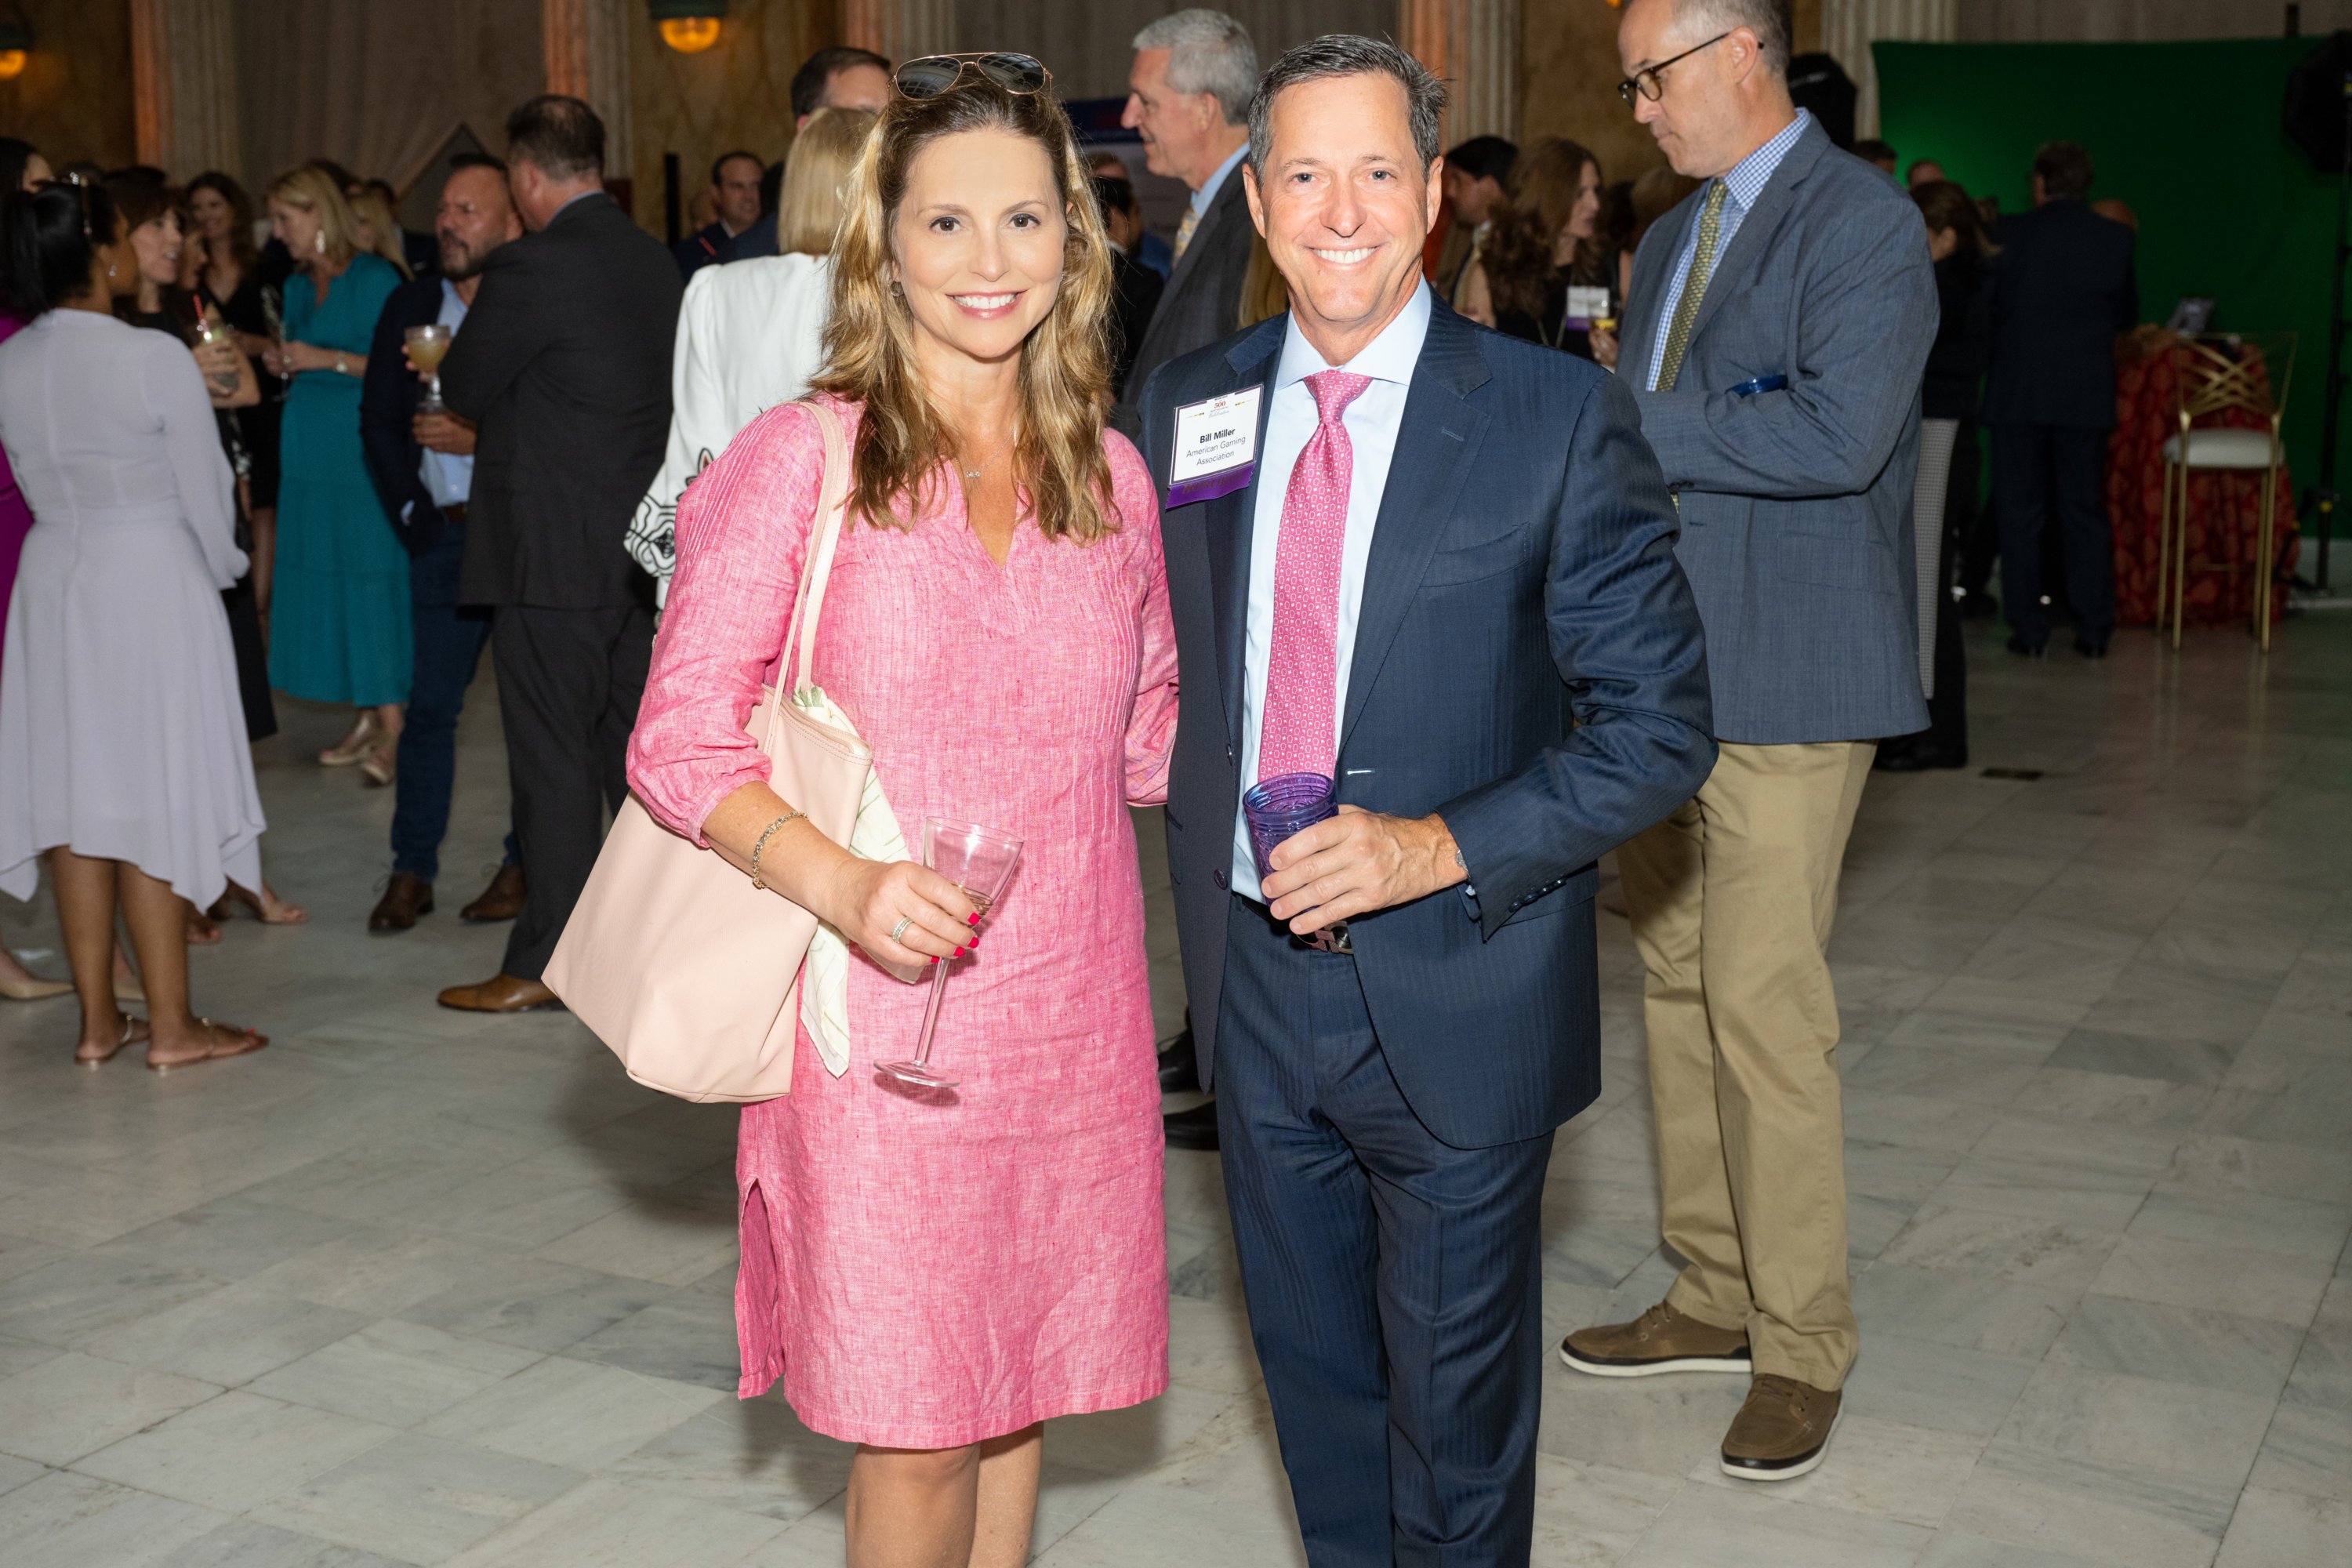 Michelle Russo and Bill Miller at The Washingtonian's 500 Most Influential People Celebration